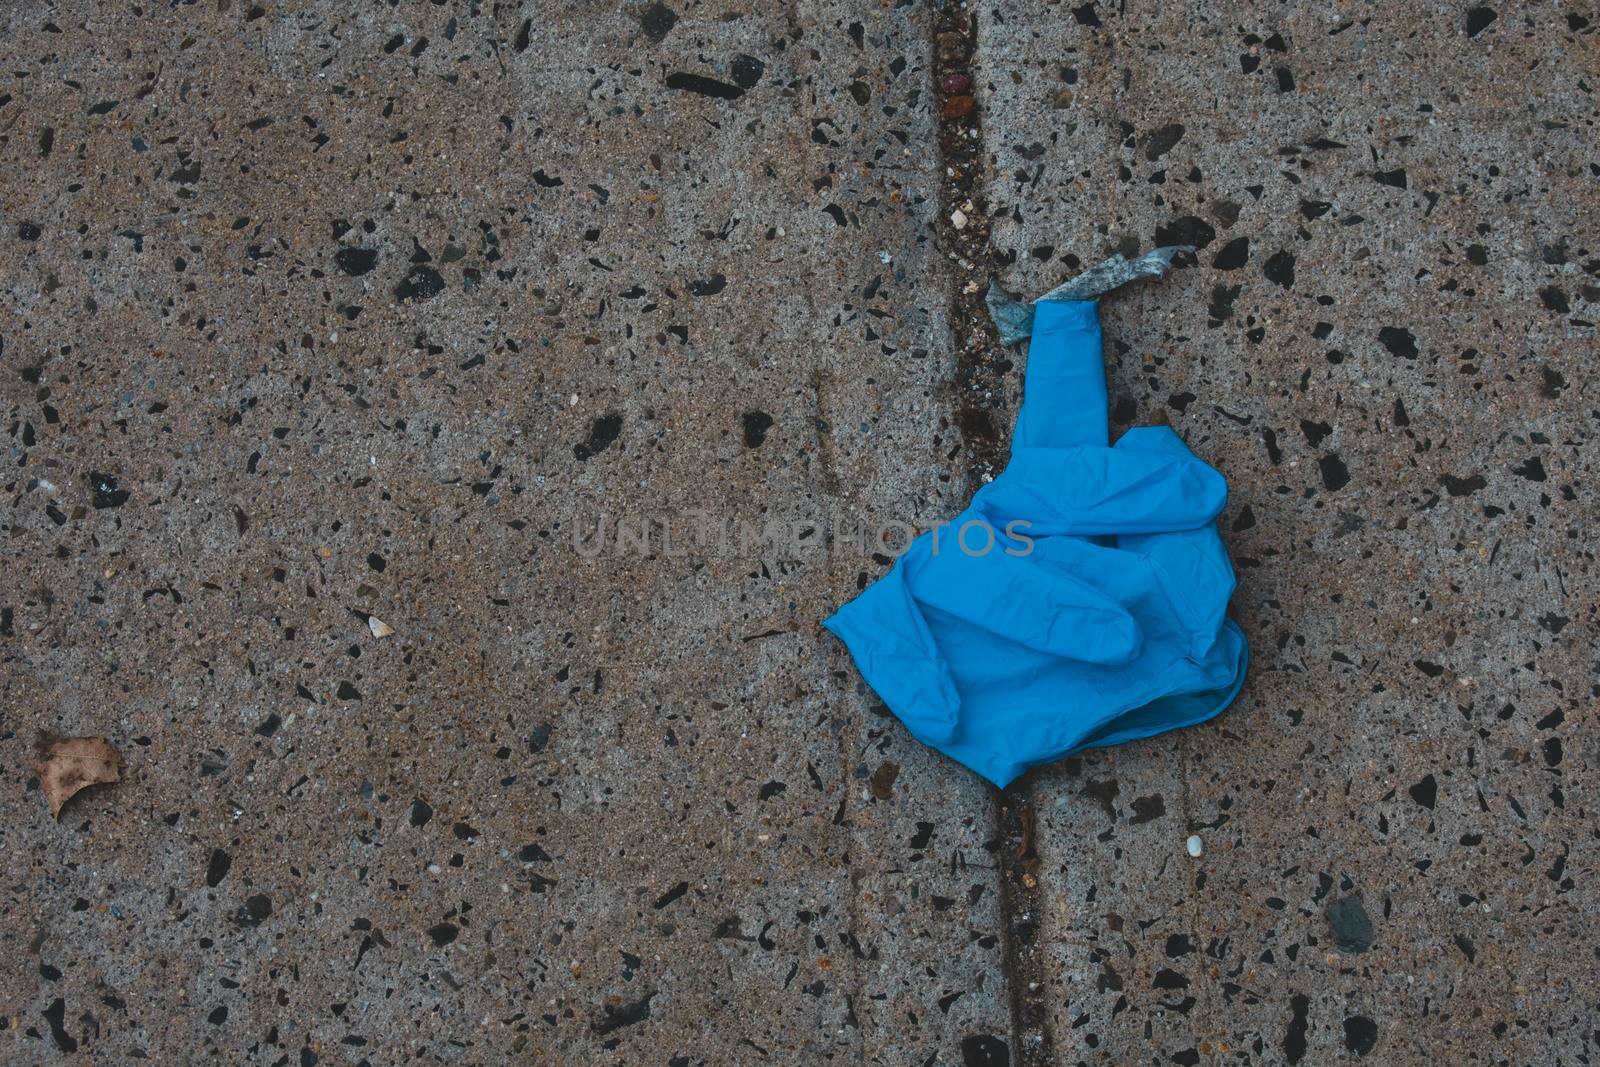 An Old Blue Medical Glove on the Ground Used to Protect From COVID-19